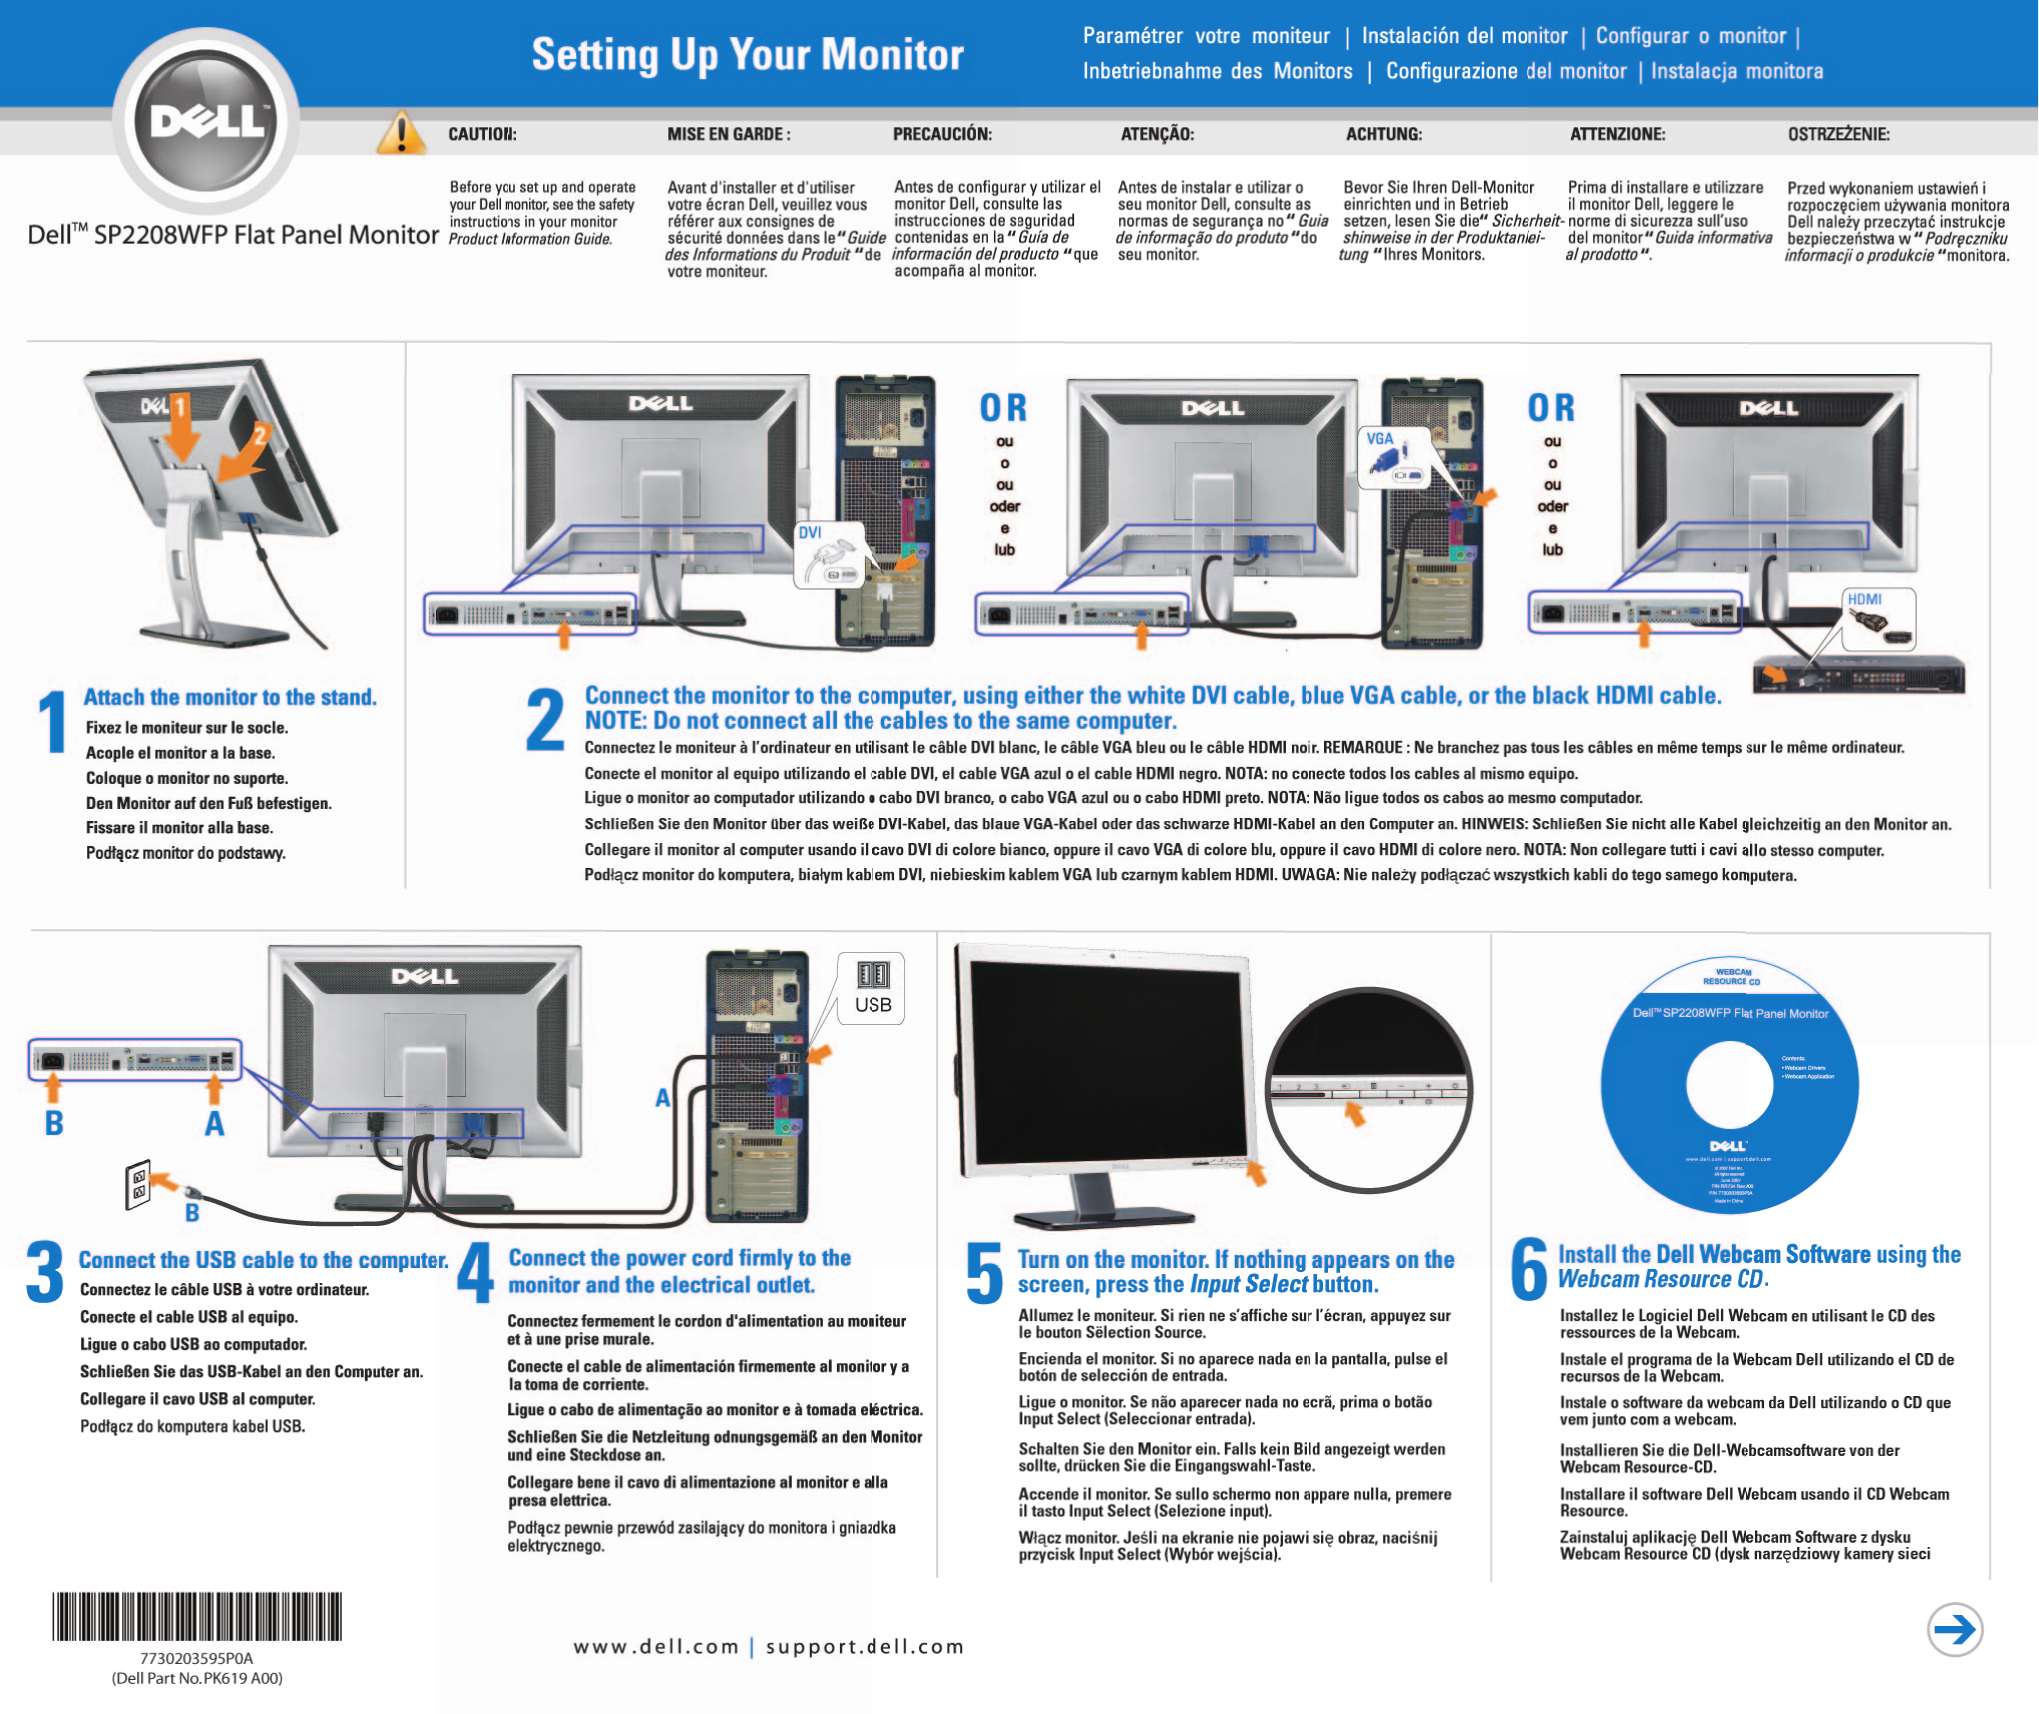 Page 1 of 4 - Dell Dell-sp2208wfp SP2208WFP Monitor Setup Diagram User Manual  - Guide En-us